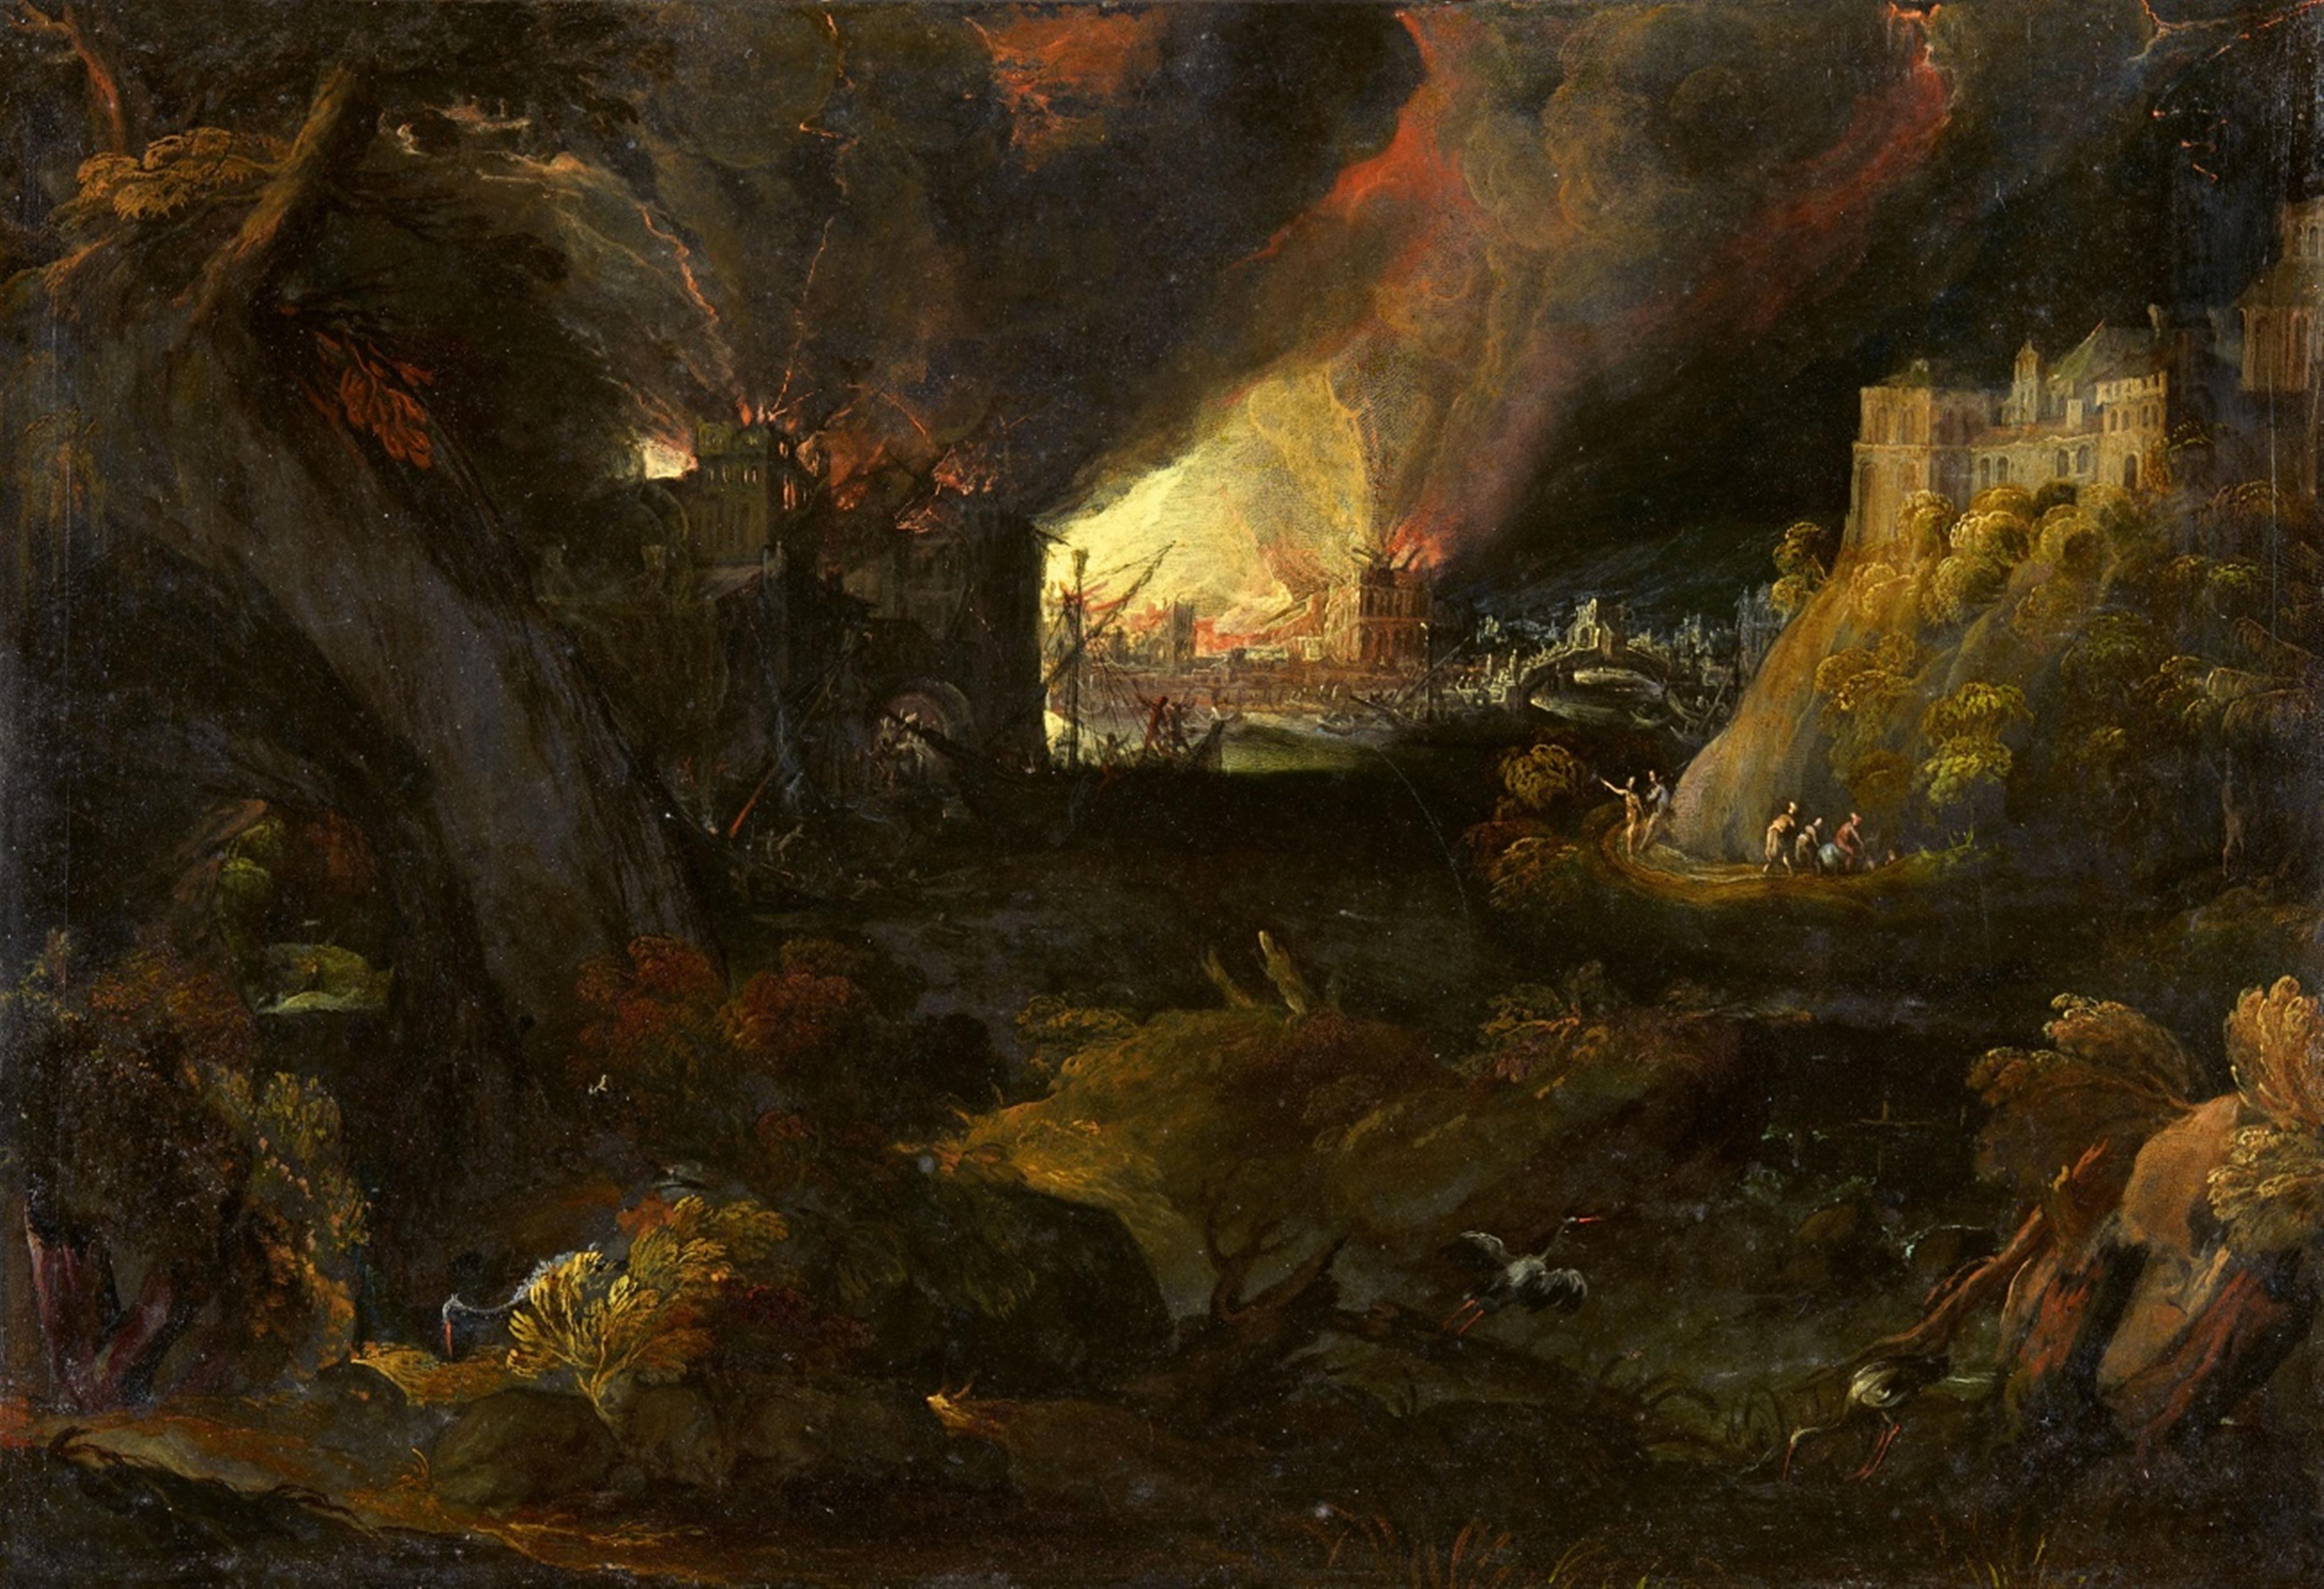 Monogramist HR - A Landscape at Night with a burning City - image-1